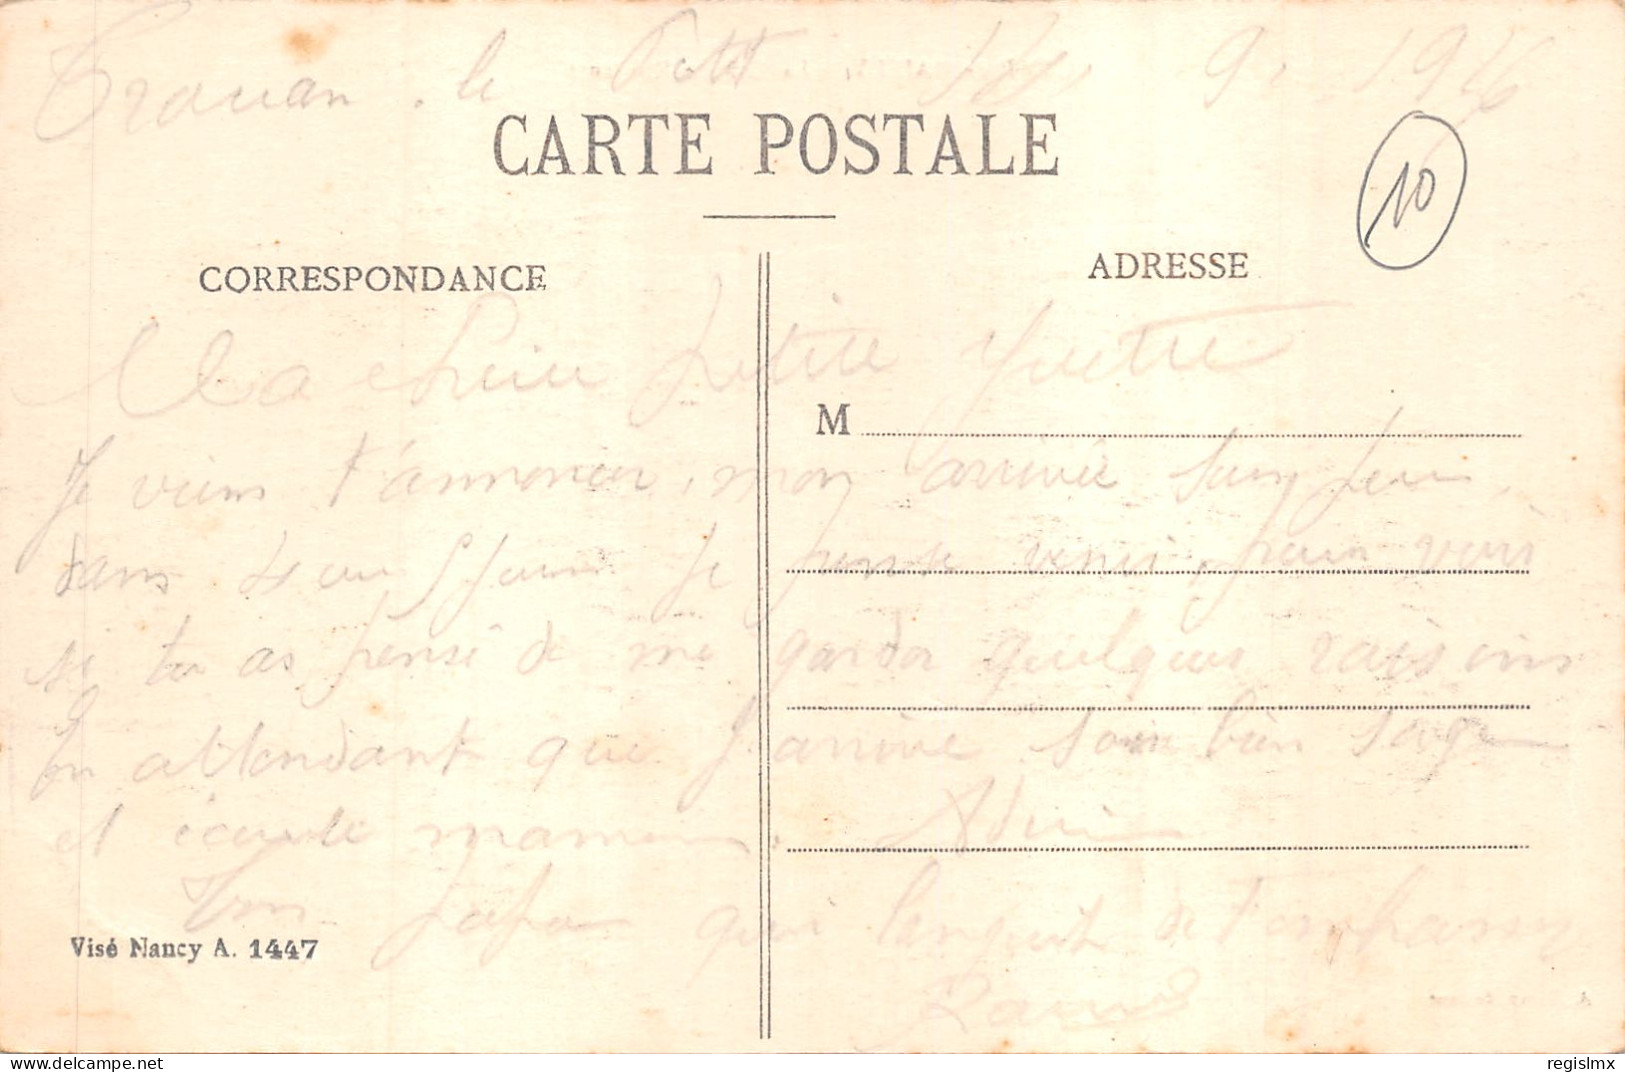 10-MAILLY LE CAMP-N°2160-C/0275 - Mailly-le-Camp